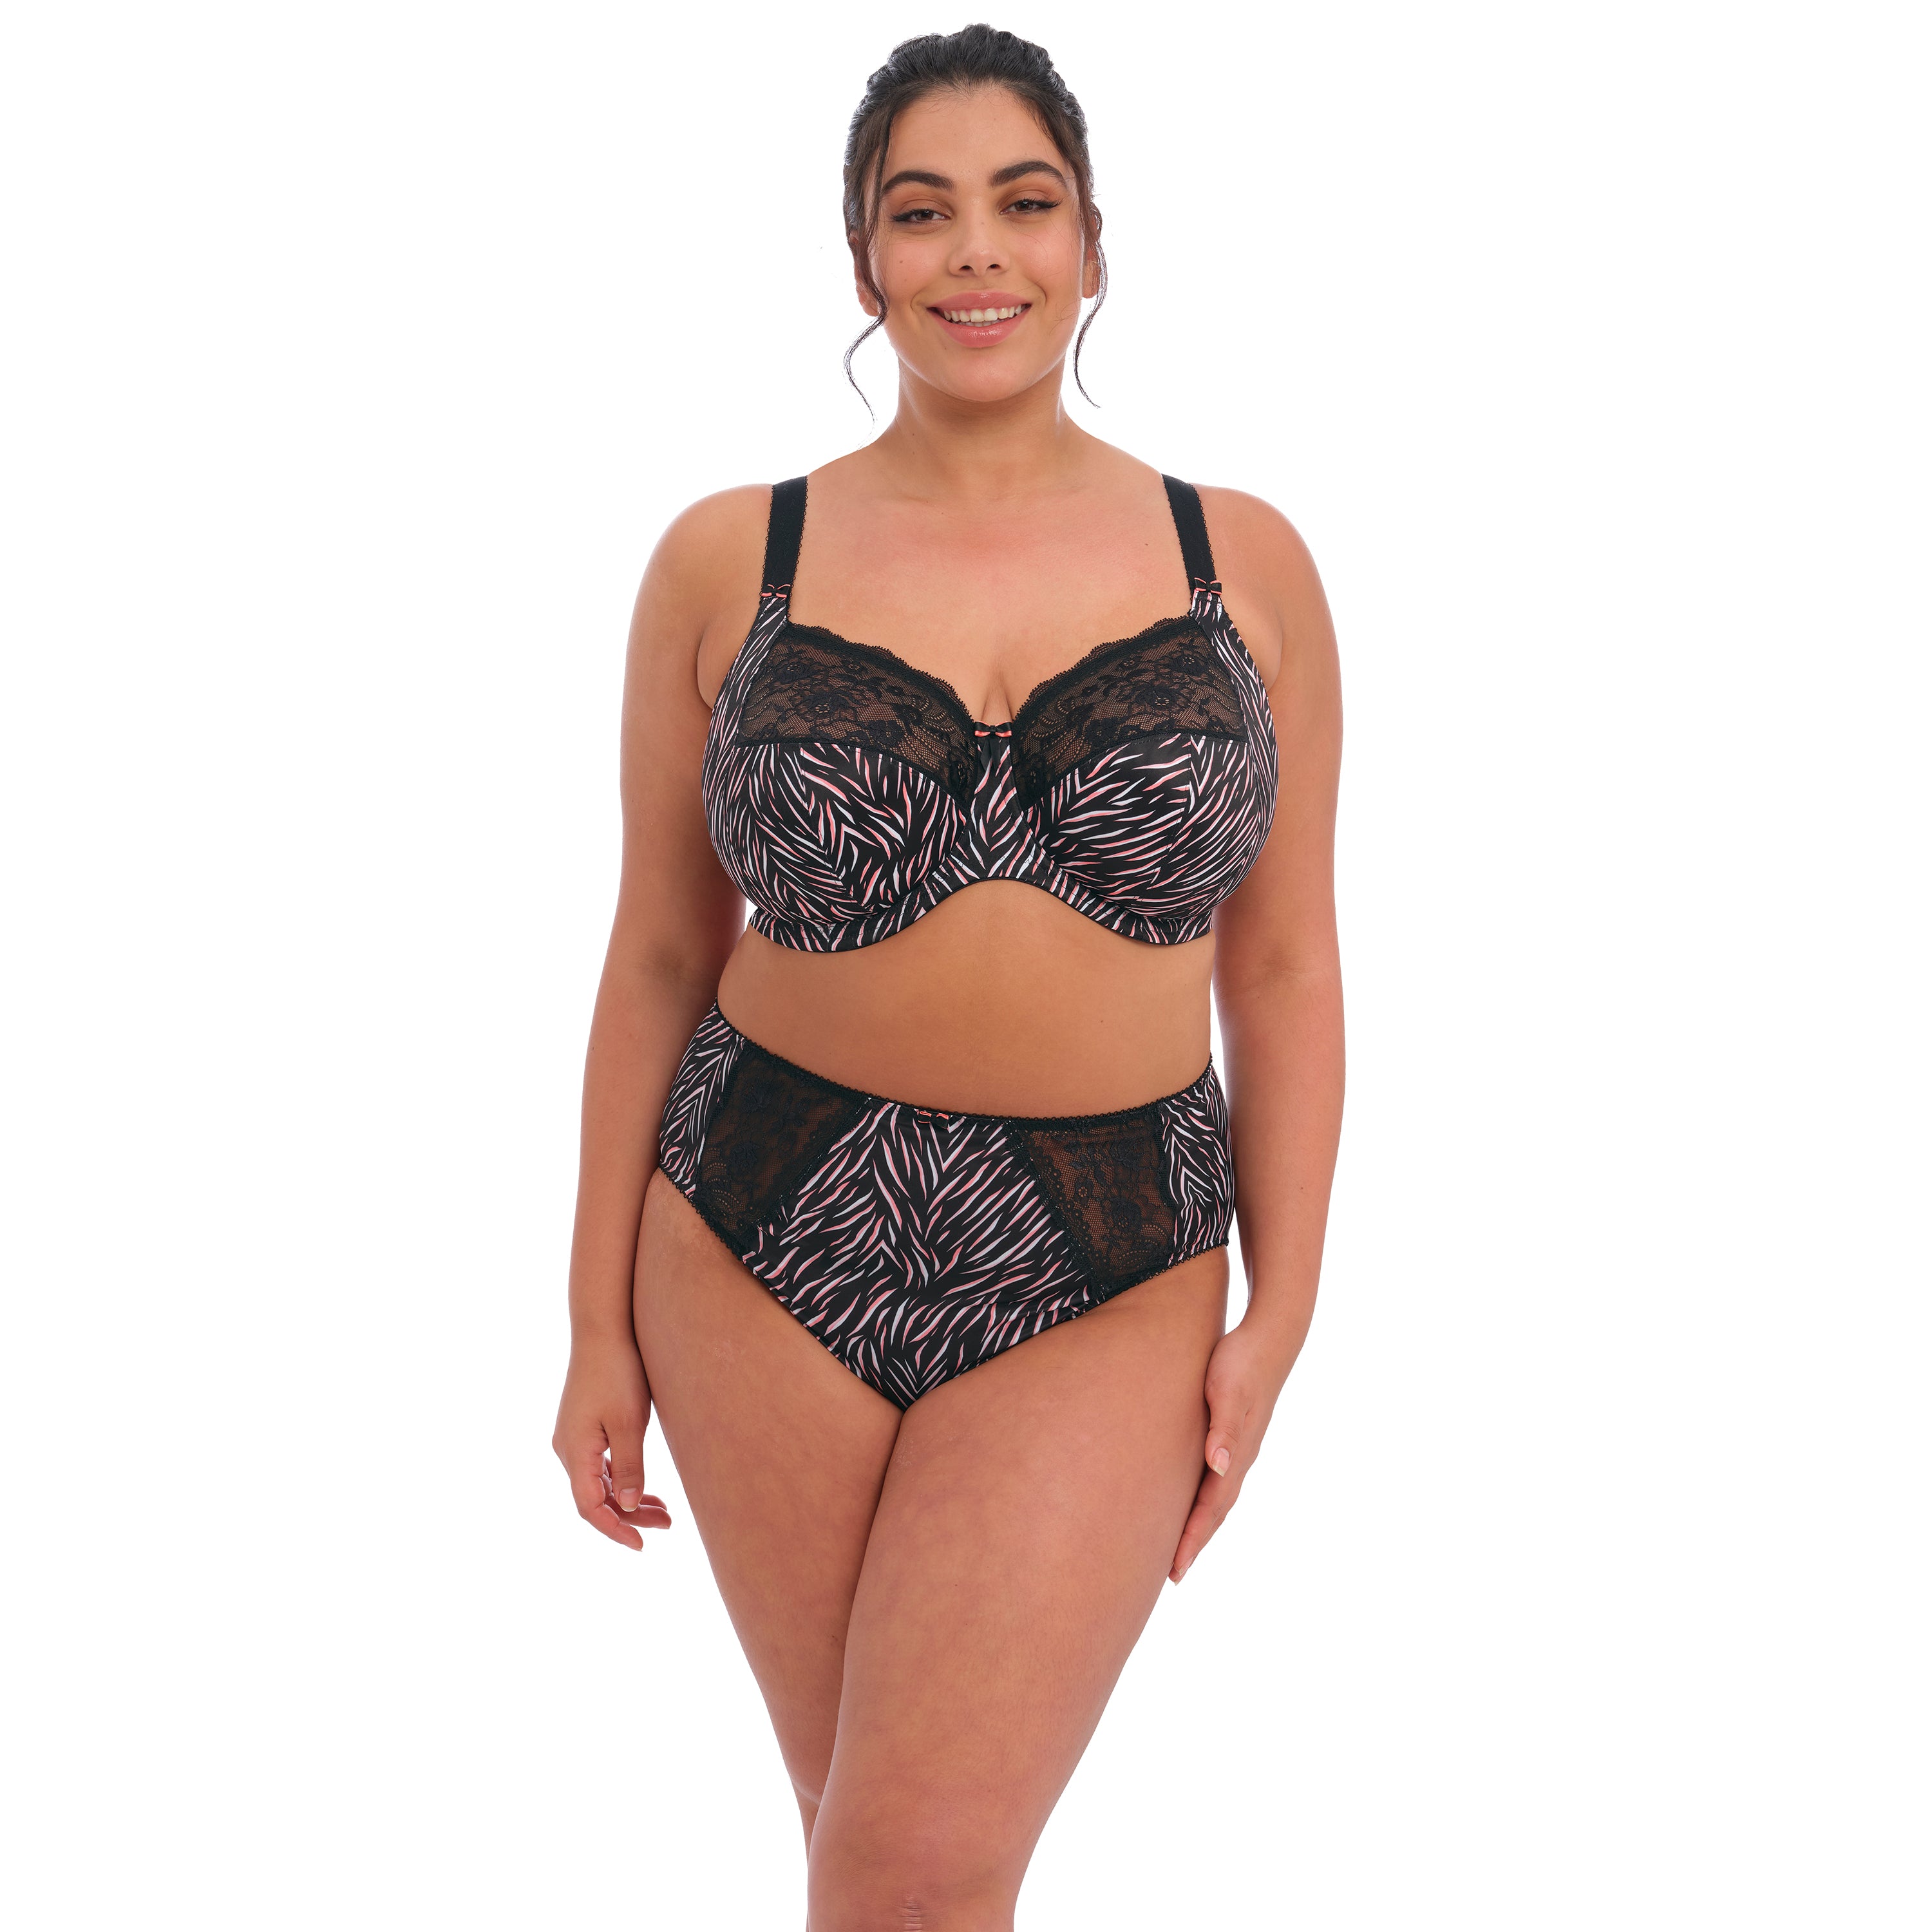 Morgan Stretch Banded Bra in Moonlight Meadow by Elomi – My Bare